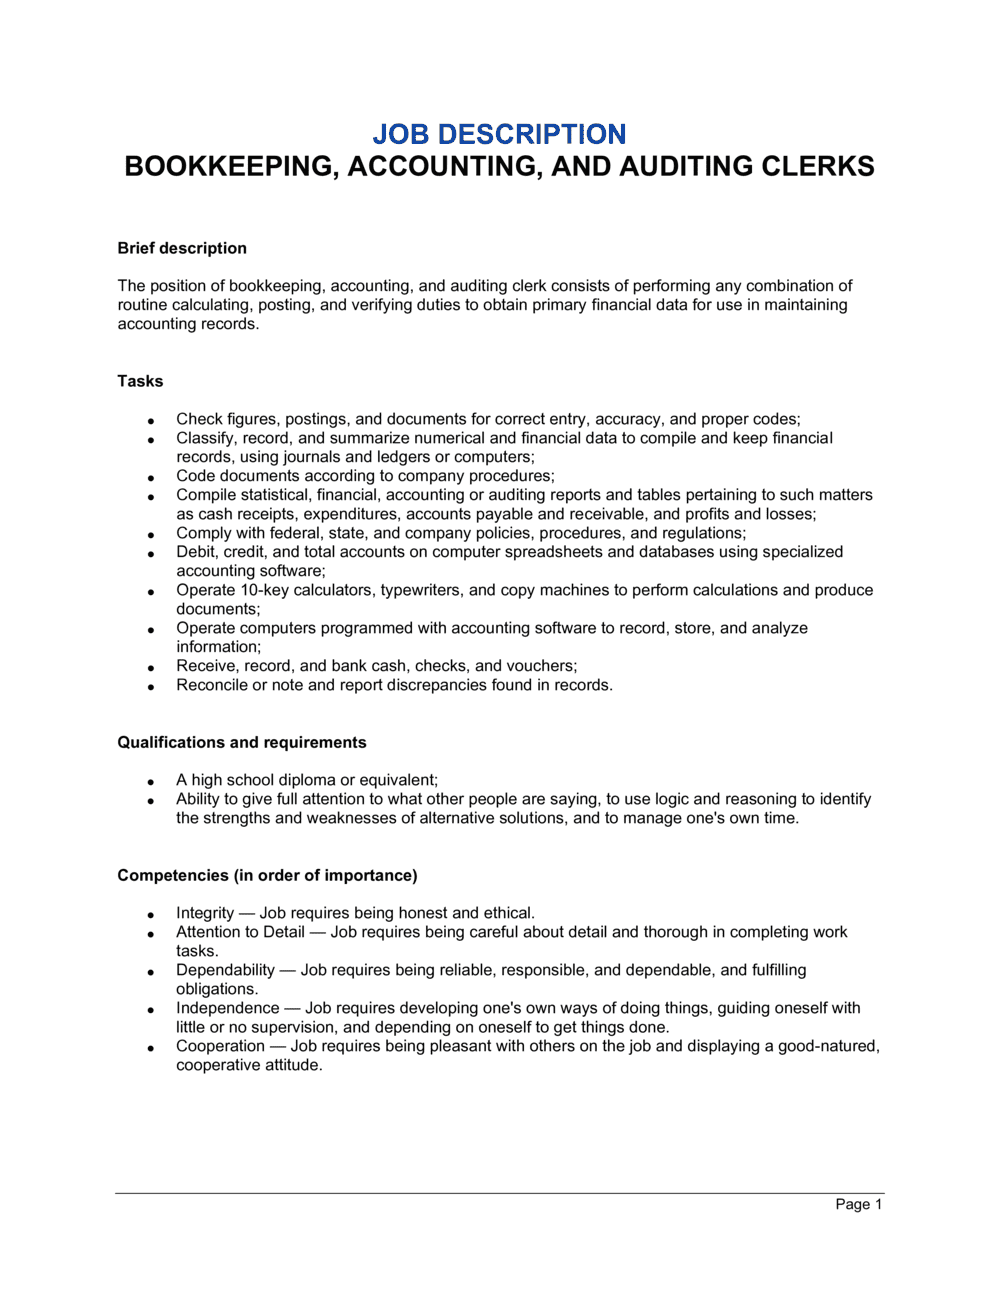 Bookkeeping, Accounting and Auditing Clerk Job Description  For Accounting Job Description Template With Accounting Job Description Template